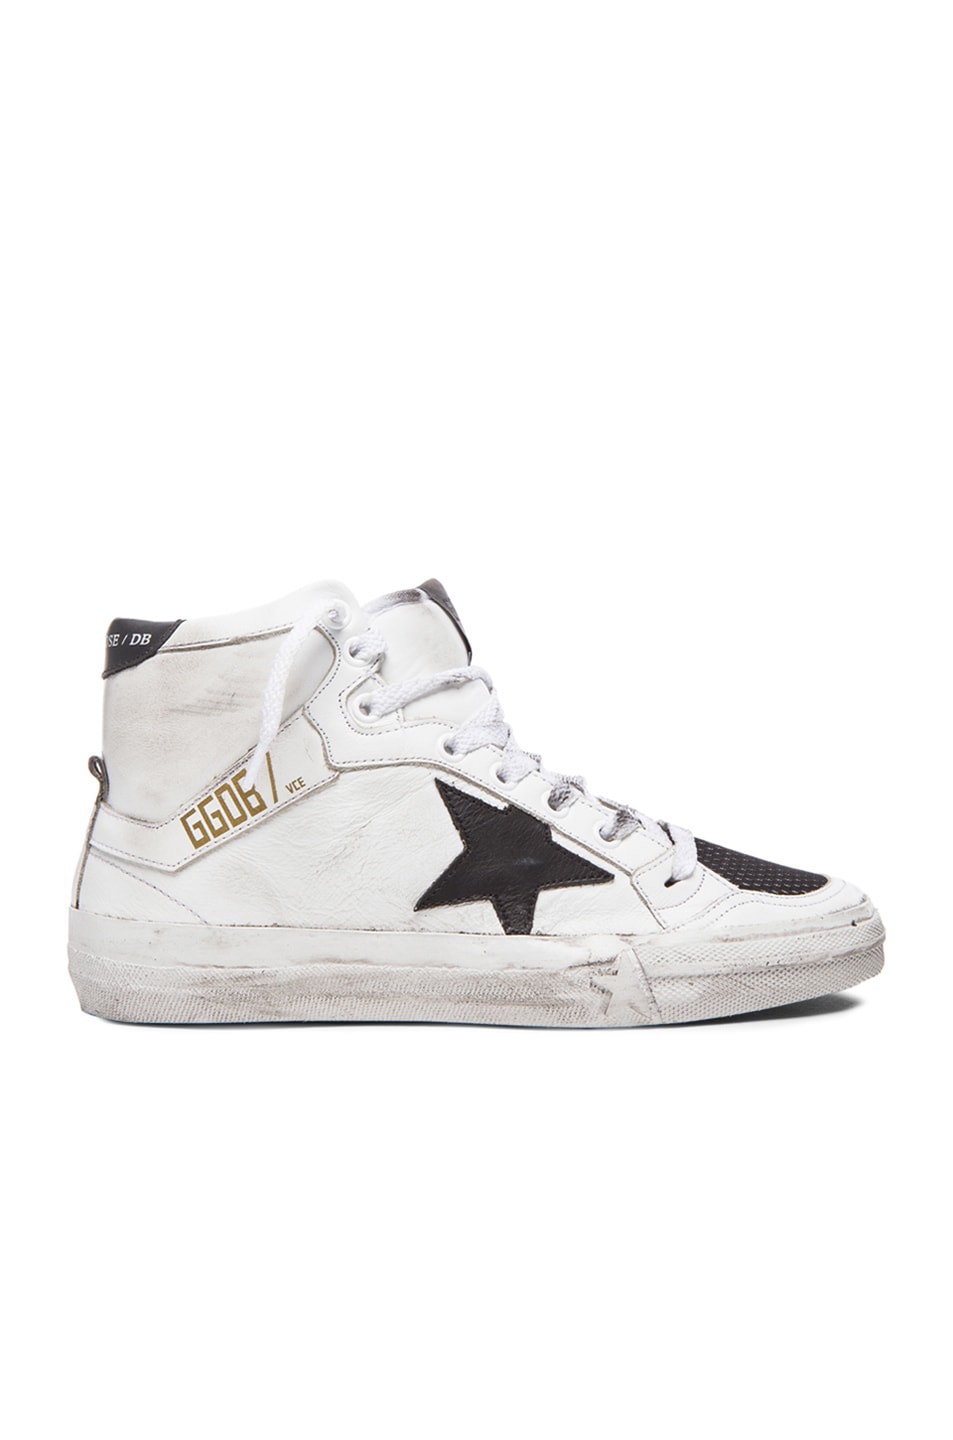 Image 1 of Golden Goose 2.12 Leather Sneakers in Black Mesh & White